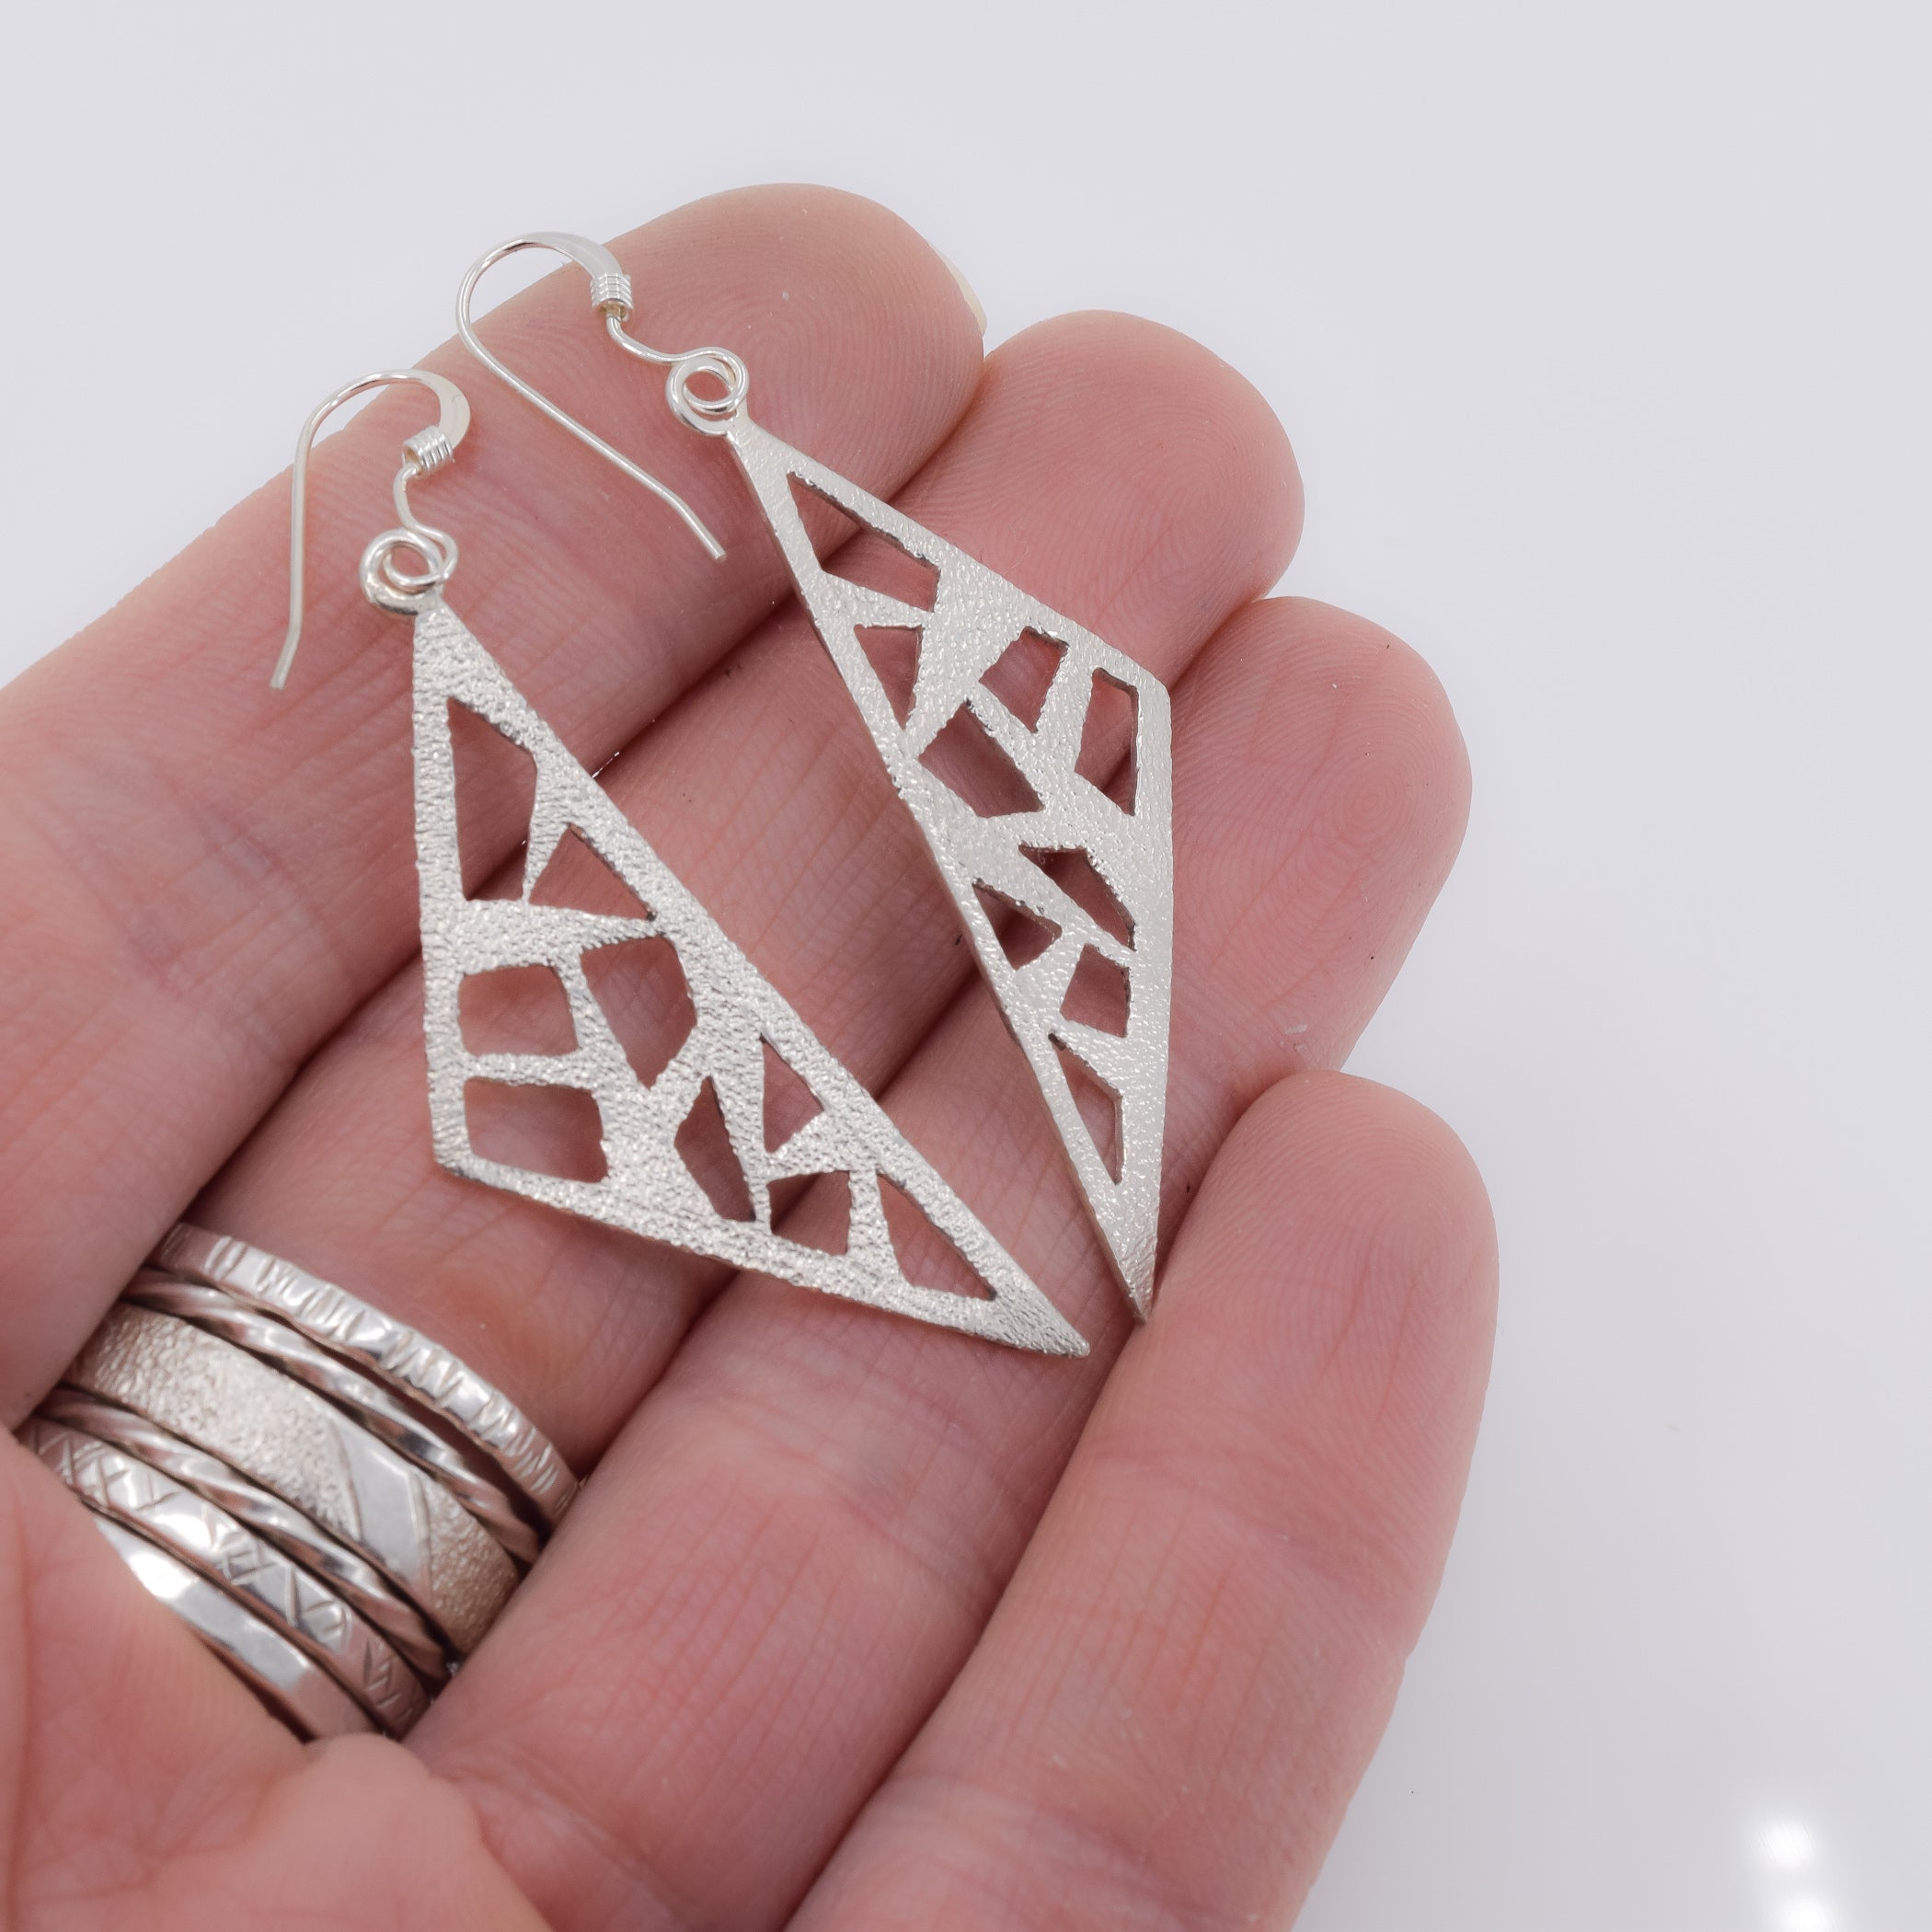 Triangle dangle earrings in sterling silver pierced with a modern design shown in hand